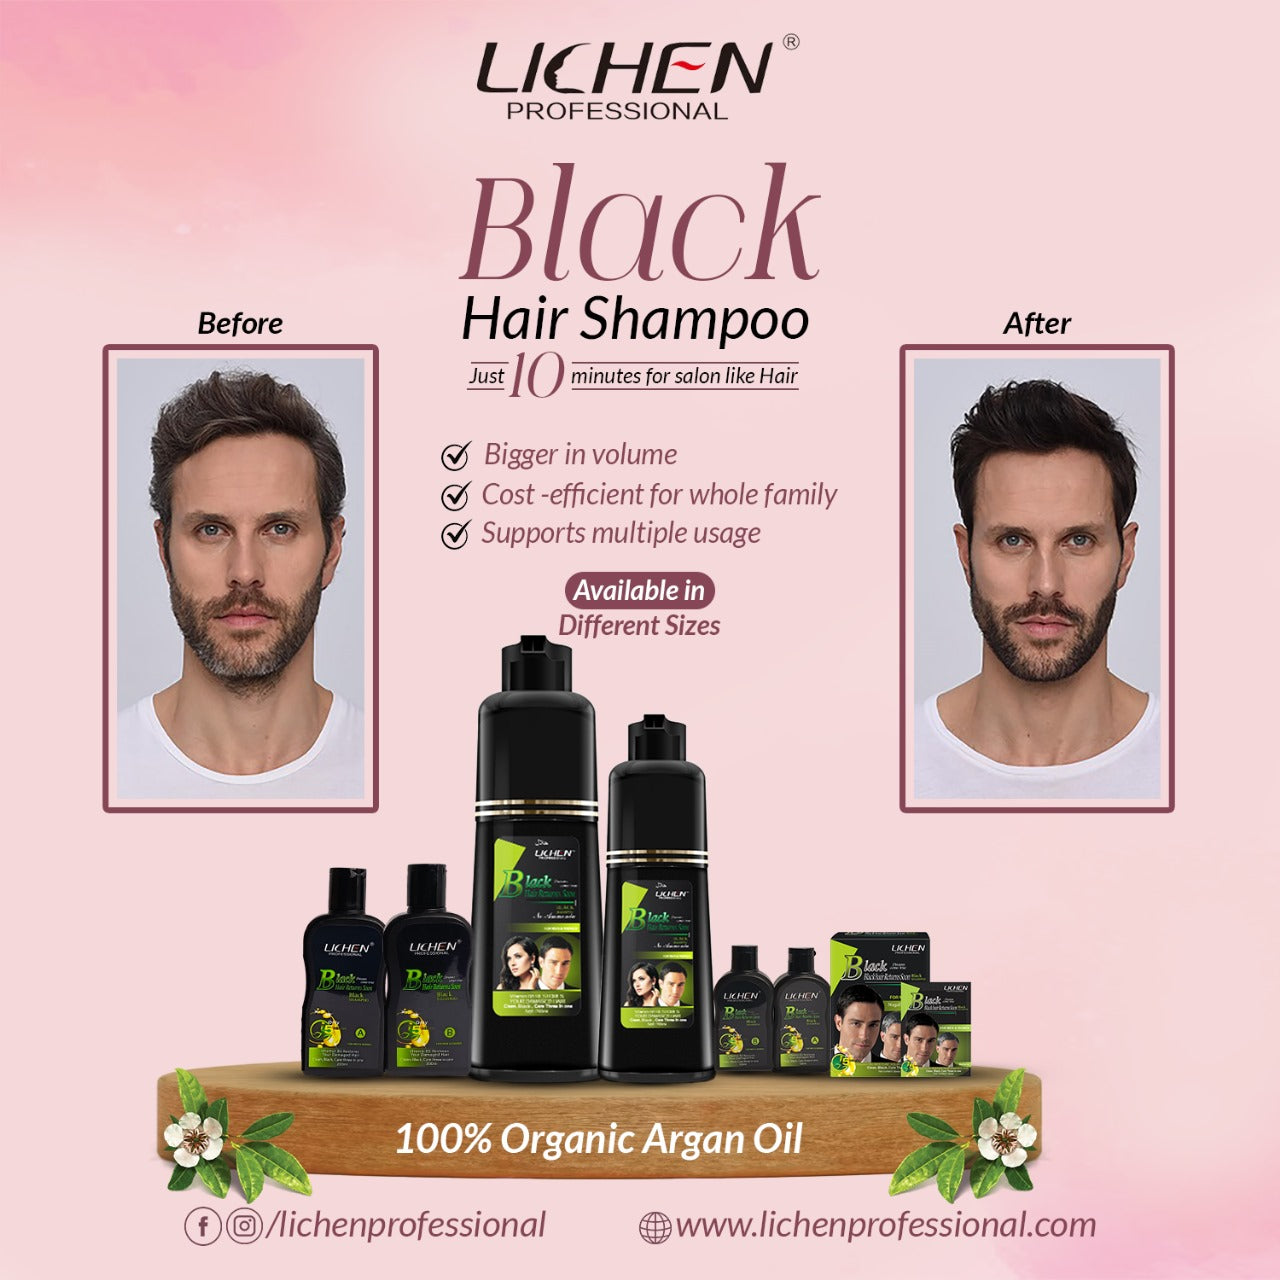 Lichen Professional Hair Color Shampoo: Your Shortcut to Beautifully Dyed Hair in Just 10 Minutes at Home